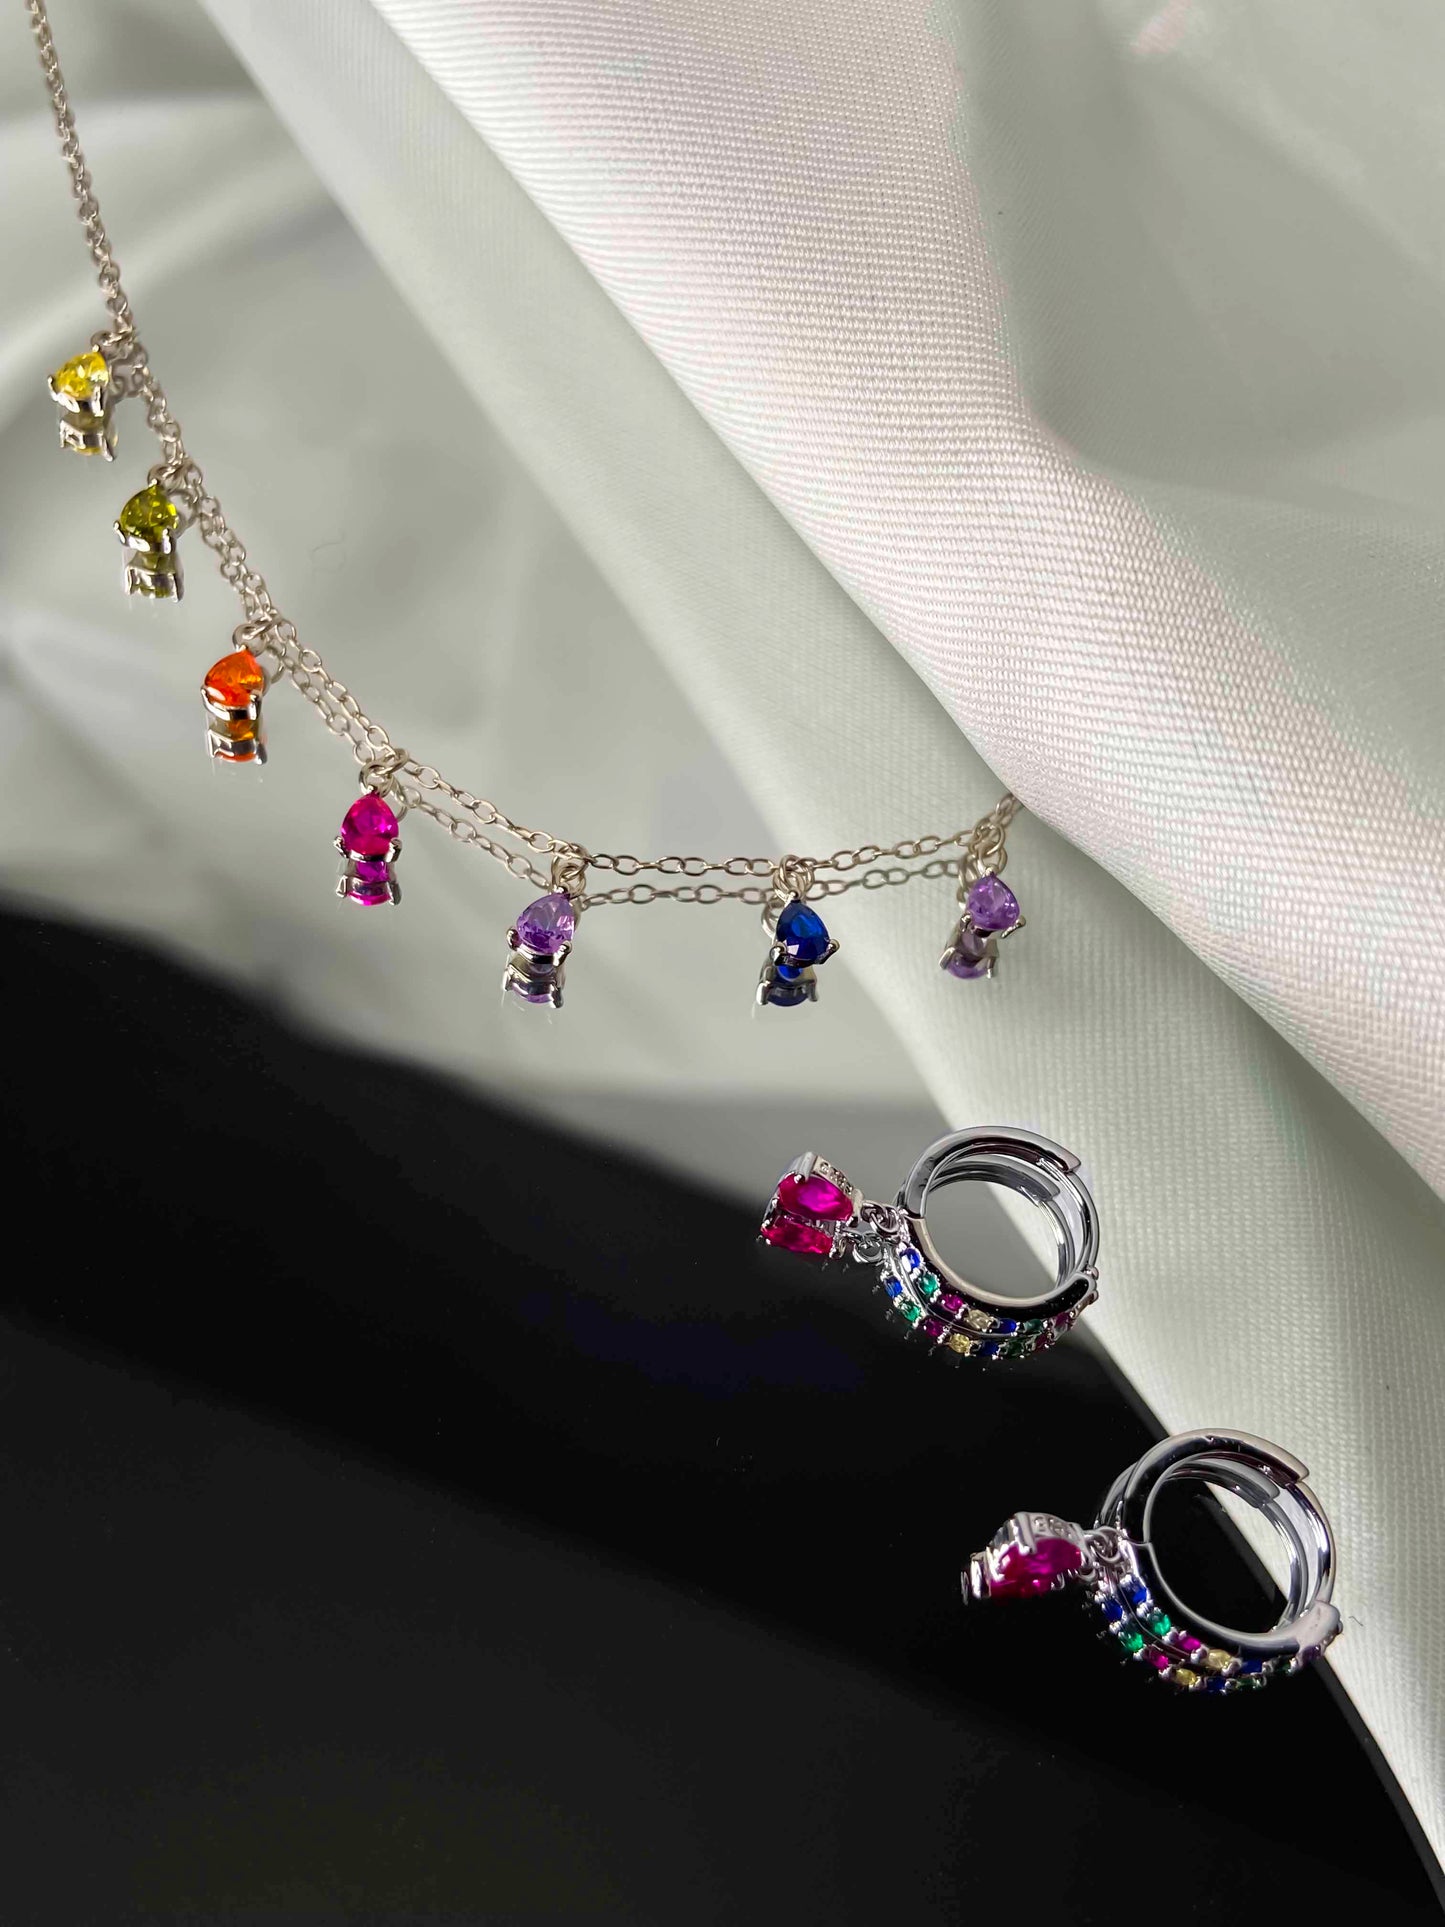 925 sterling silver huggie hoop earrings and chain necklace with multicolored zirconia stones. 